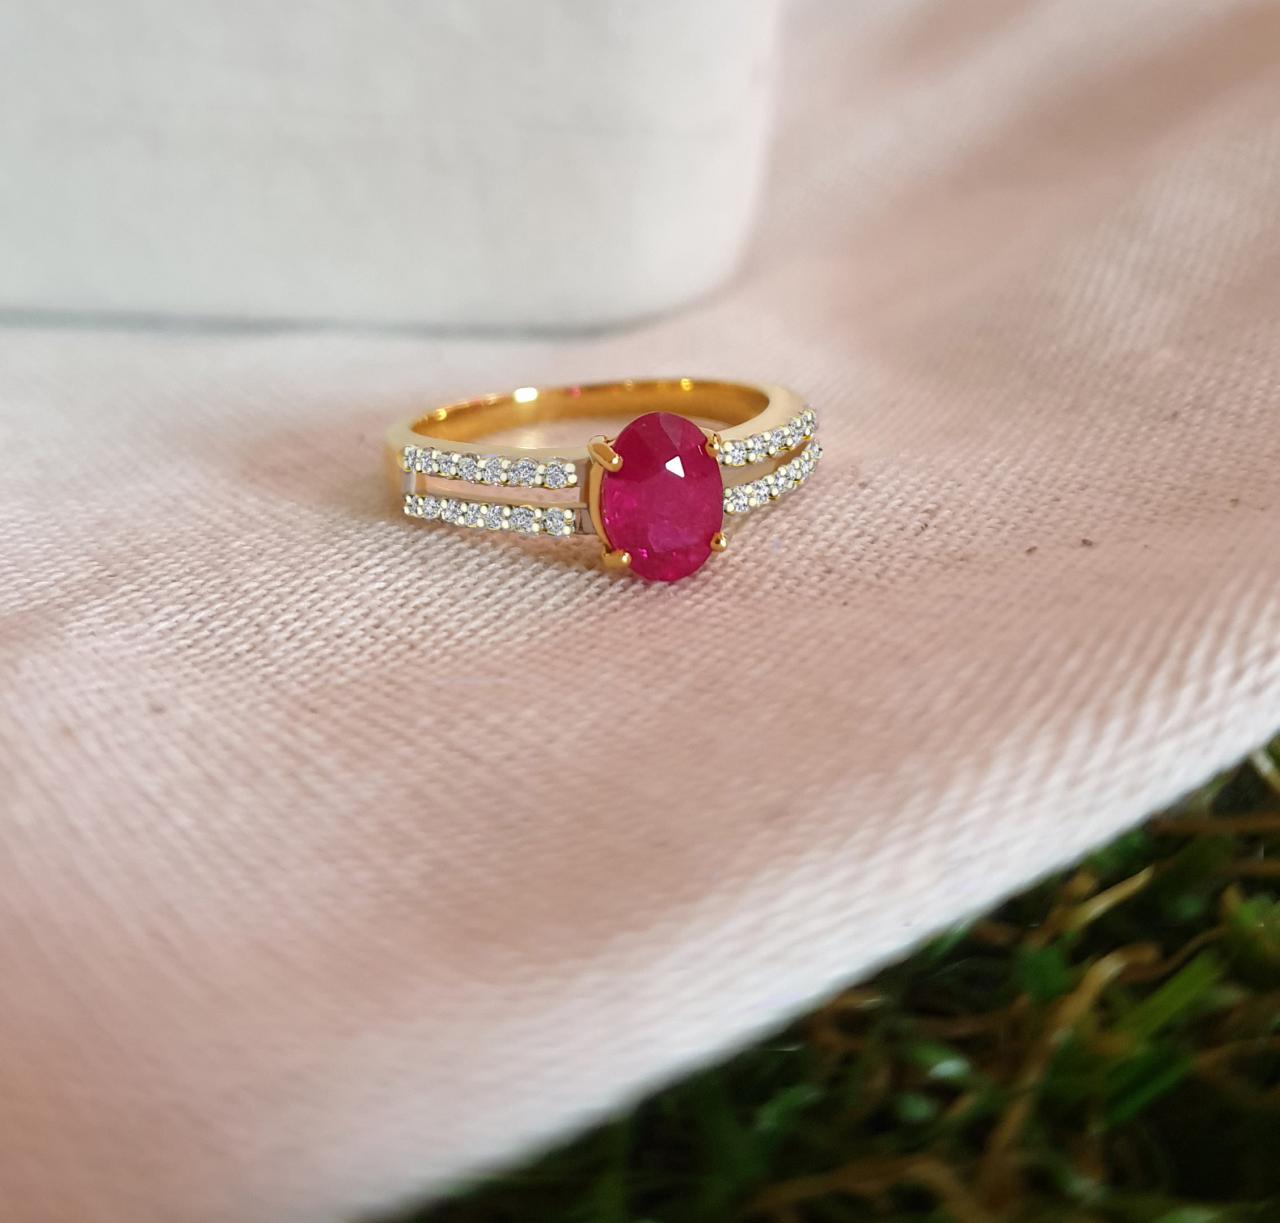 Natural Red Ruby Gemstone Ring For Woman,9k Gold Jewelry, Thai Ruby Ring For July Birthday Gemstones For Her,wholesale Jewelry In Thailand